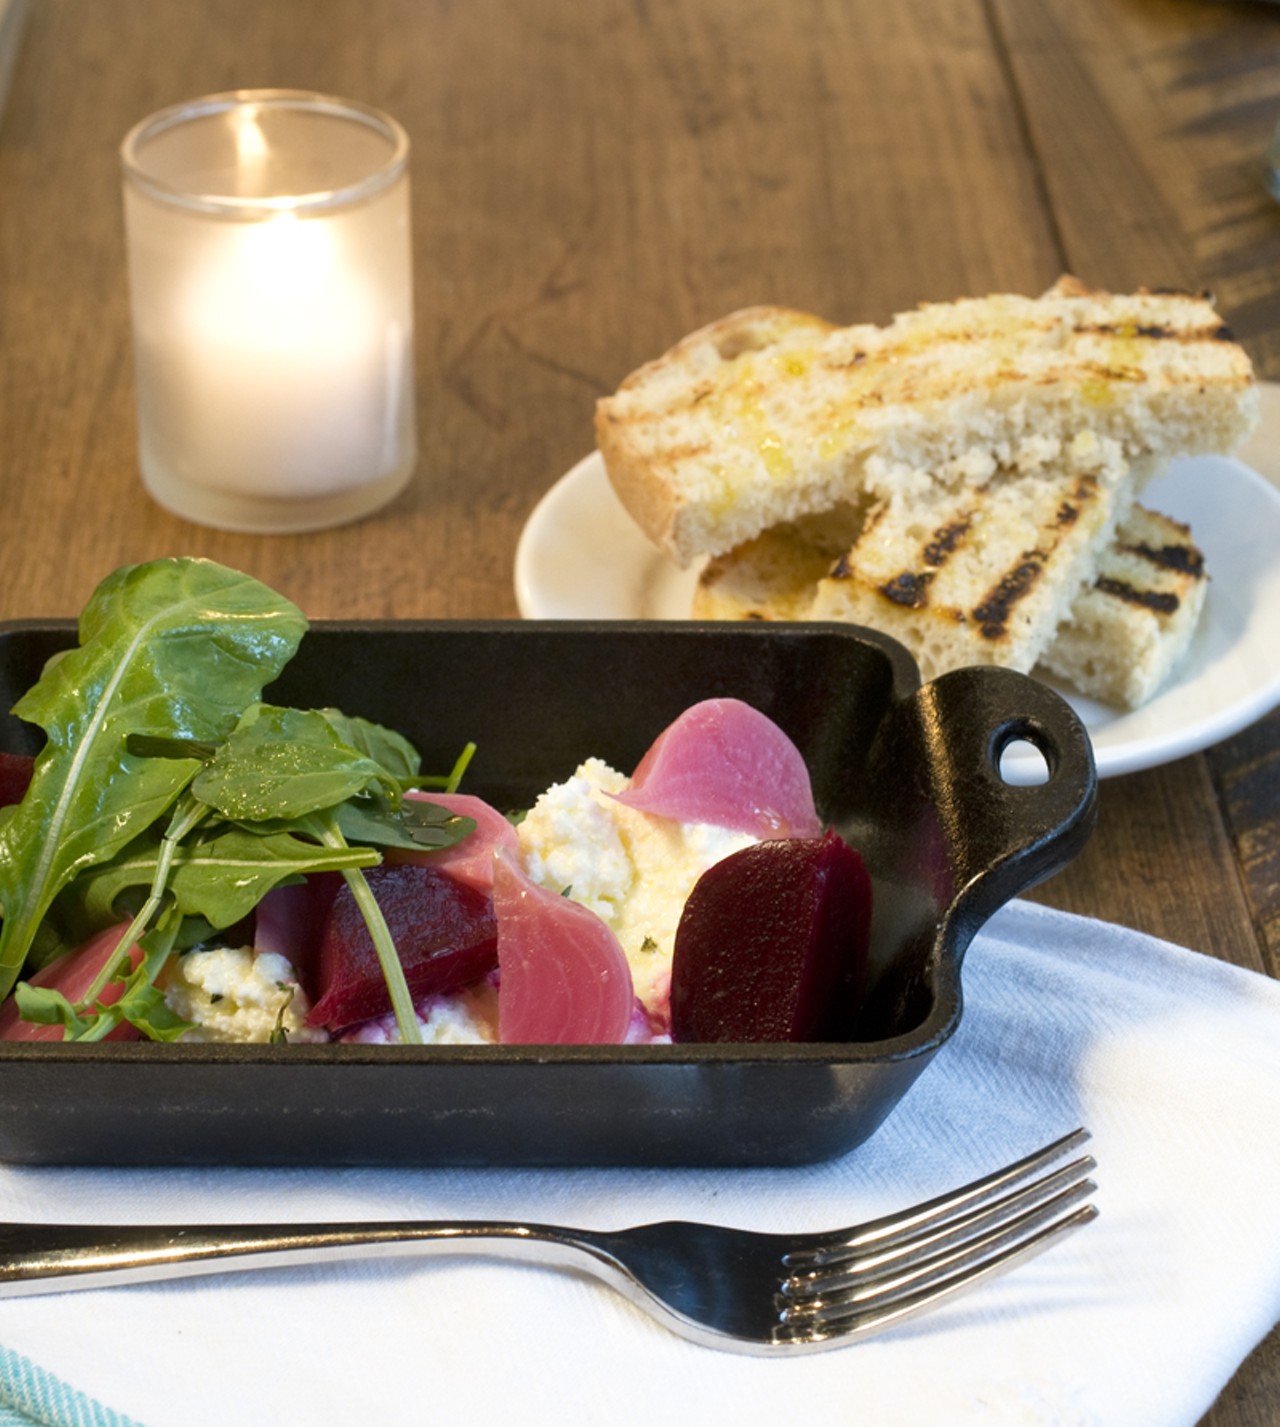 The ricotta and pickled beet small plate with ricotta made in-house from raw milk supplied by Greenwood Farms in Newburg, Missouri. The beets, arugula and thyme are sourced from St. Isidore Farms (pickling done in-house) in Moscow, Mills, Missouri.